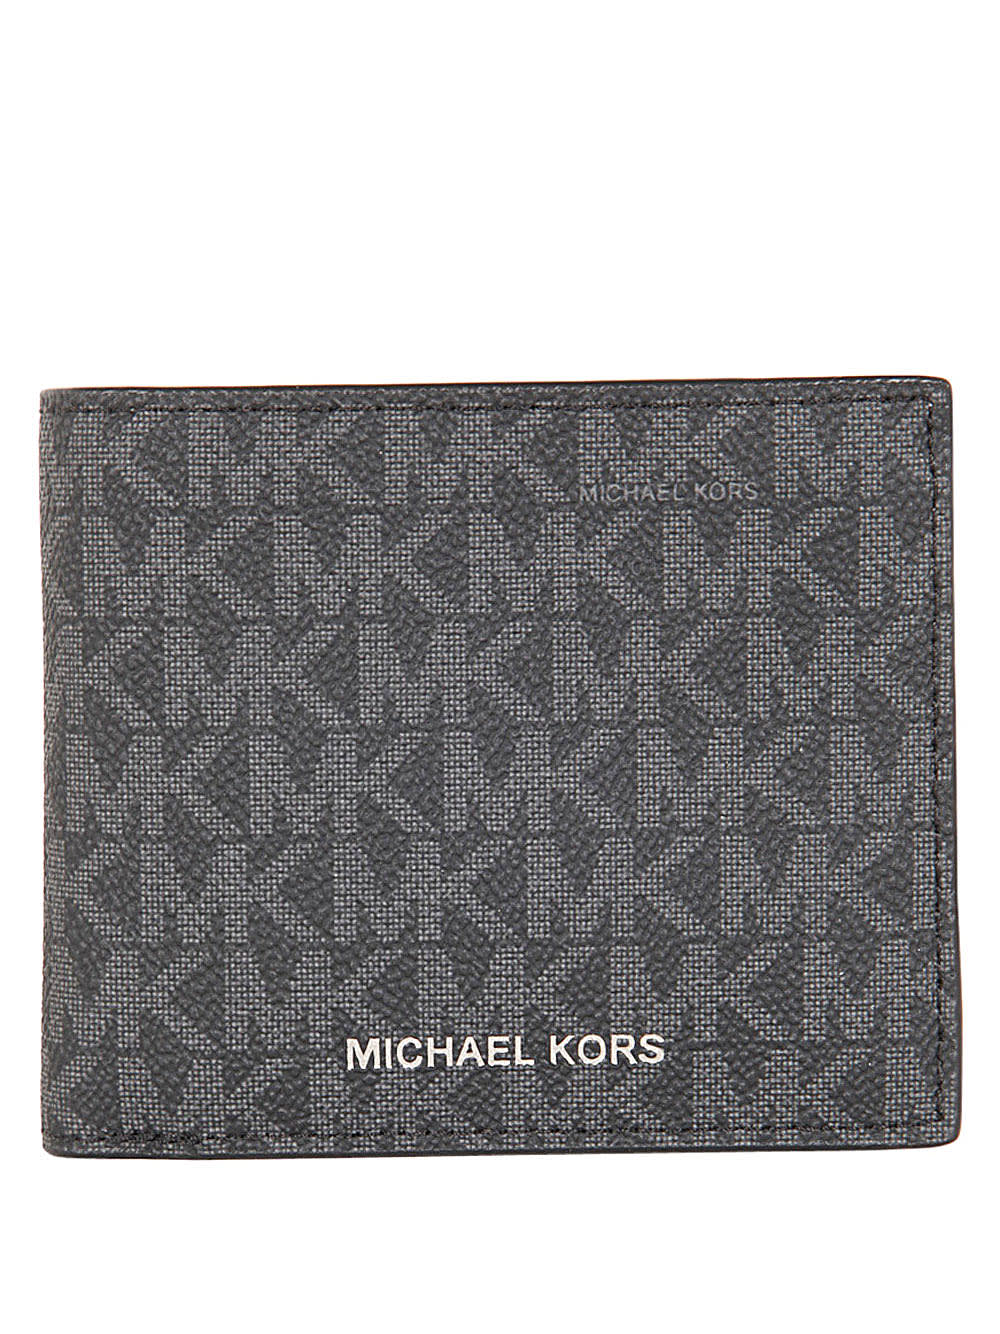 Michael Kors Billfold Wallet With Coin Pocket